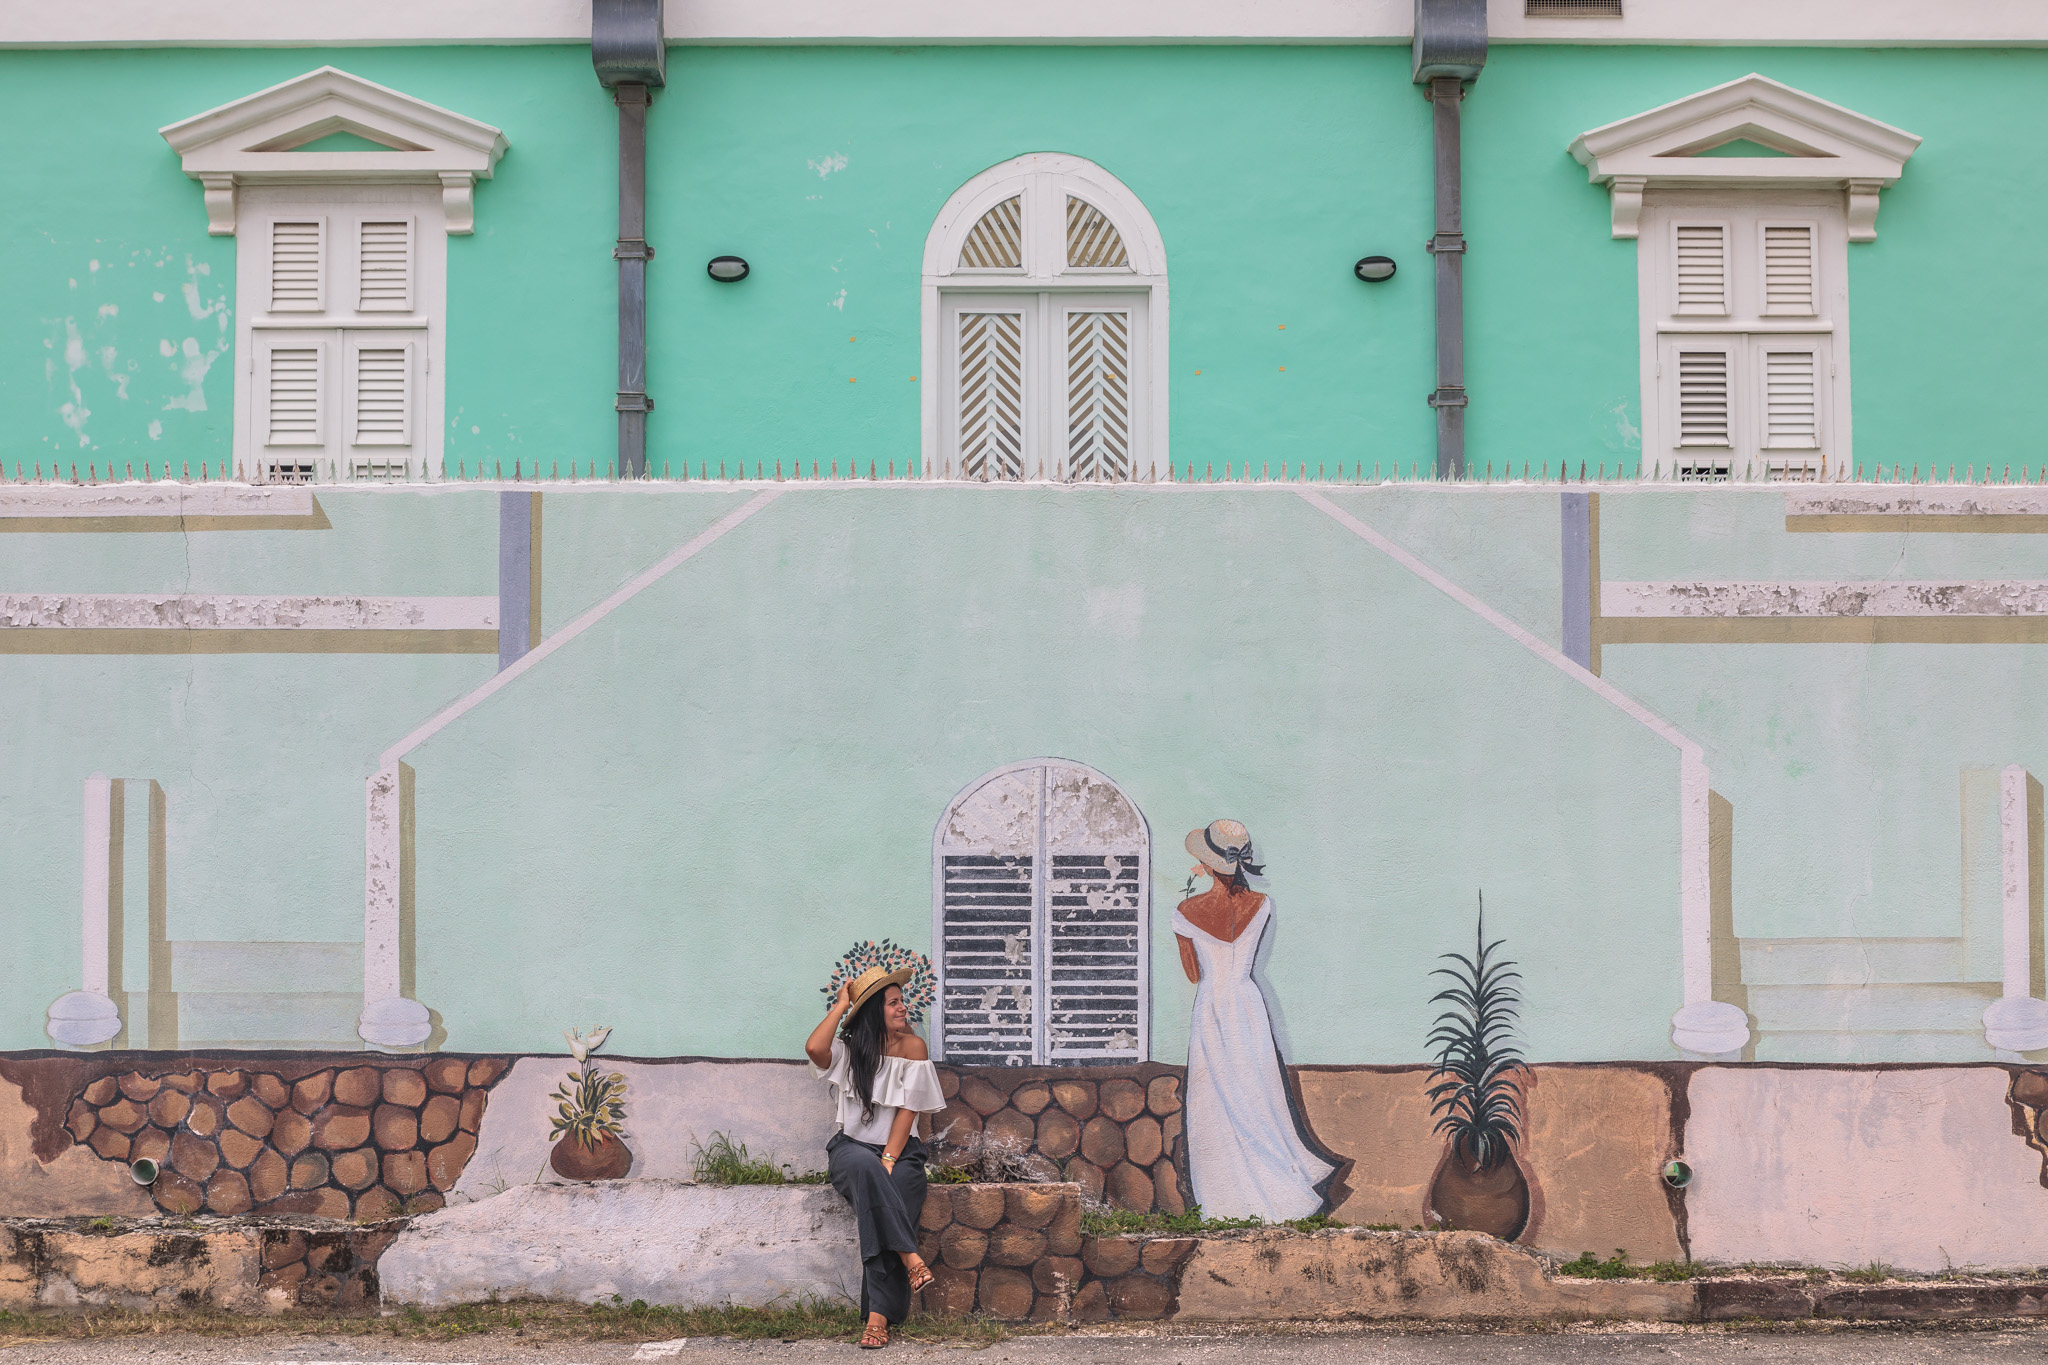 The colorful street art of Willemstad, Curaçao // 20 Photos to Show You Why Curaçao Needs to Be On Your Travel Radar // www.readysetjetset.net #readysetjetset #curacao #caribbean #beach #ocean #paradise #travel